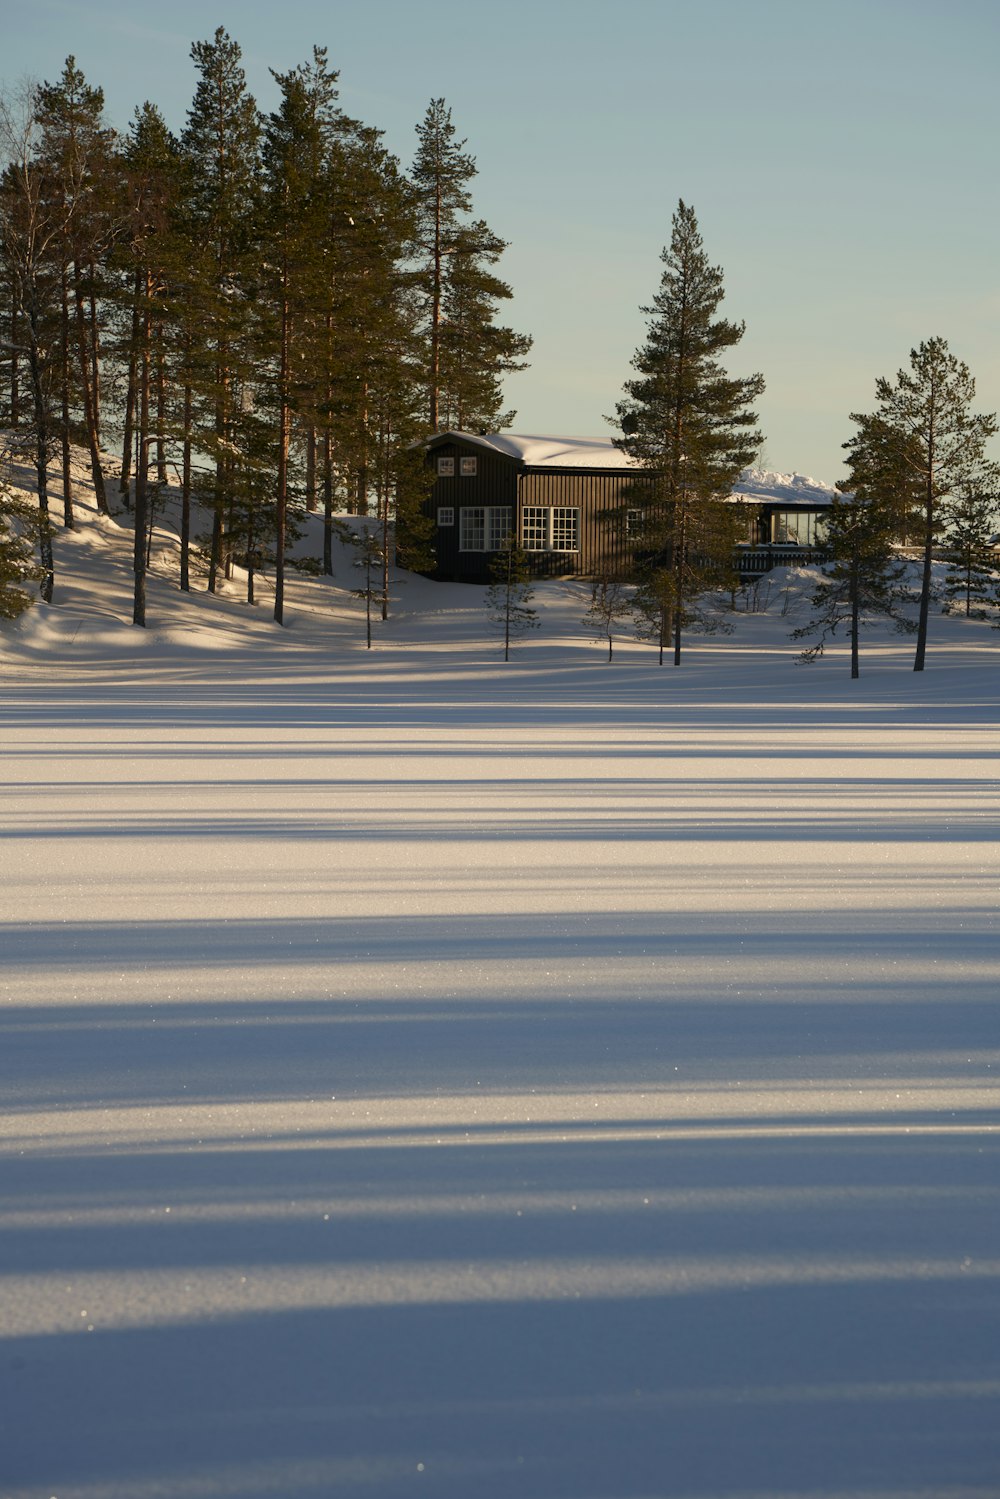 a snow covered field with a house in the background